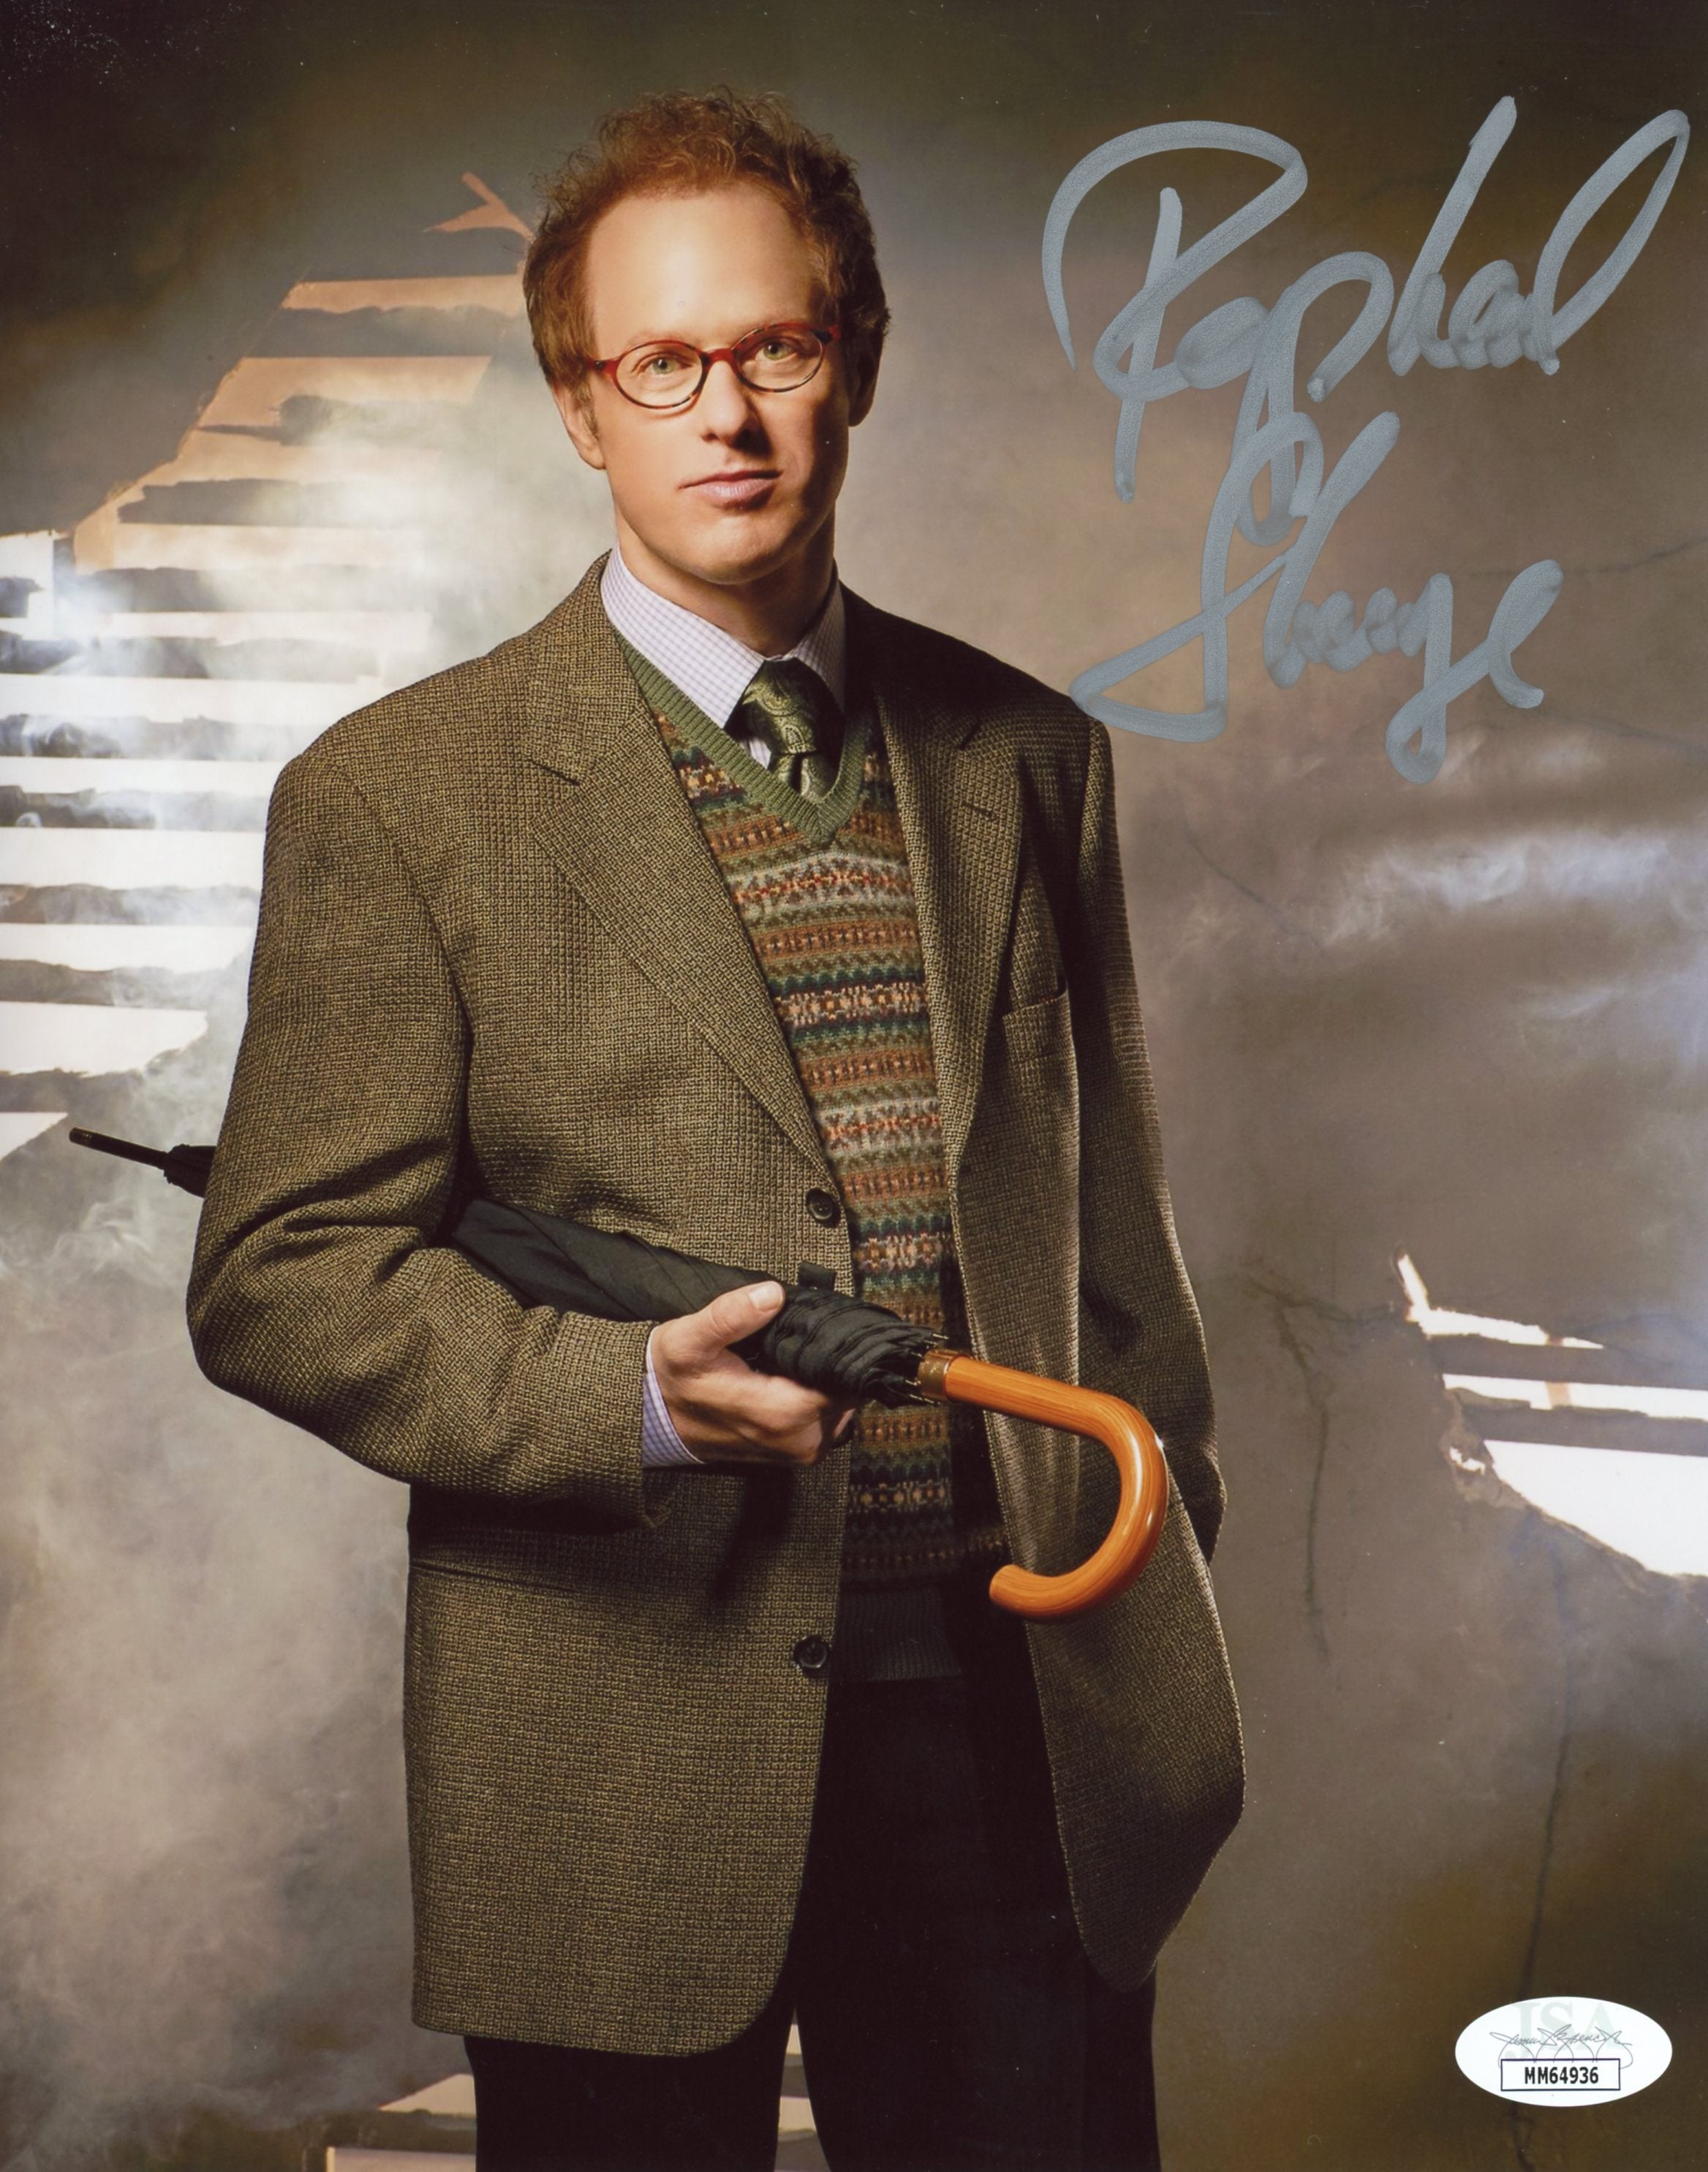 Raphael Sbarge Once Upon A Time 8x10 Photo Signed Autograph JSA Certified COA Auto